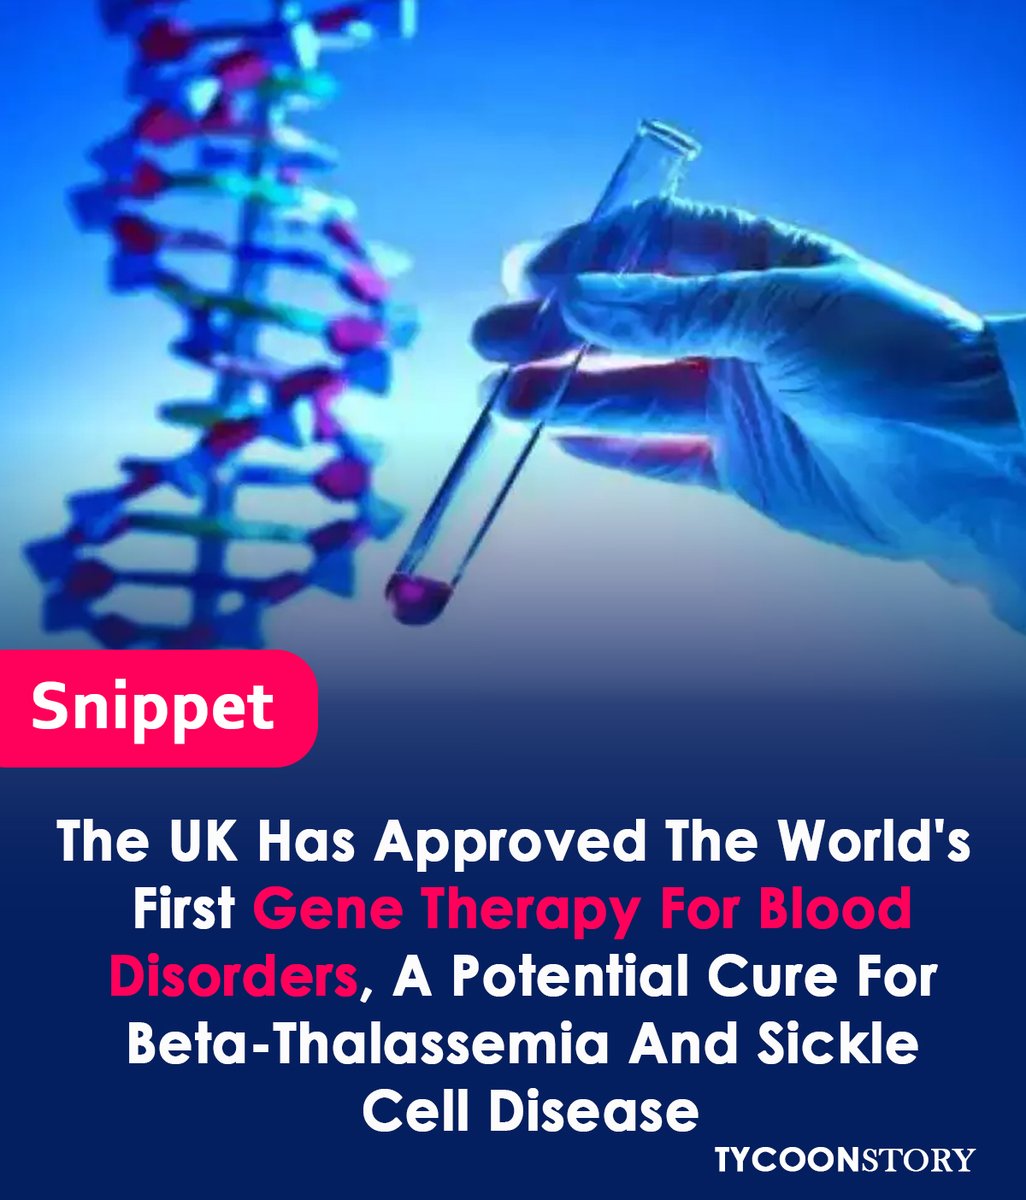 First In The World, The Uk Approves Gene Therapy For Blood Disorders  

 #GeneTherapy #BloodDisorders #UKFirst #MedicalBreakthrough #CRISPR #SickleCellDisease #BetaThalassemia #TransformativeMedicine #HealthcareInnovation 

 tycoonstory.com